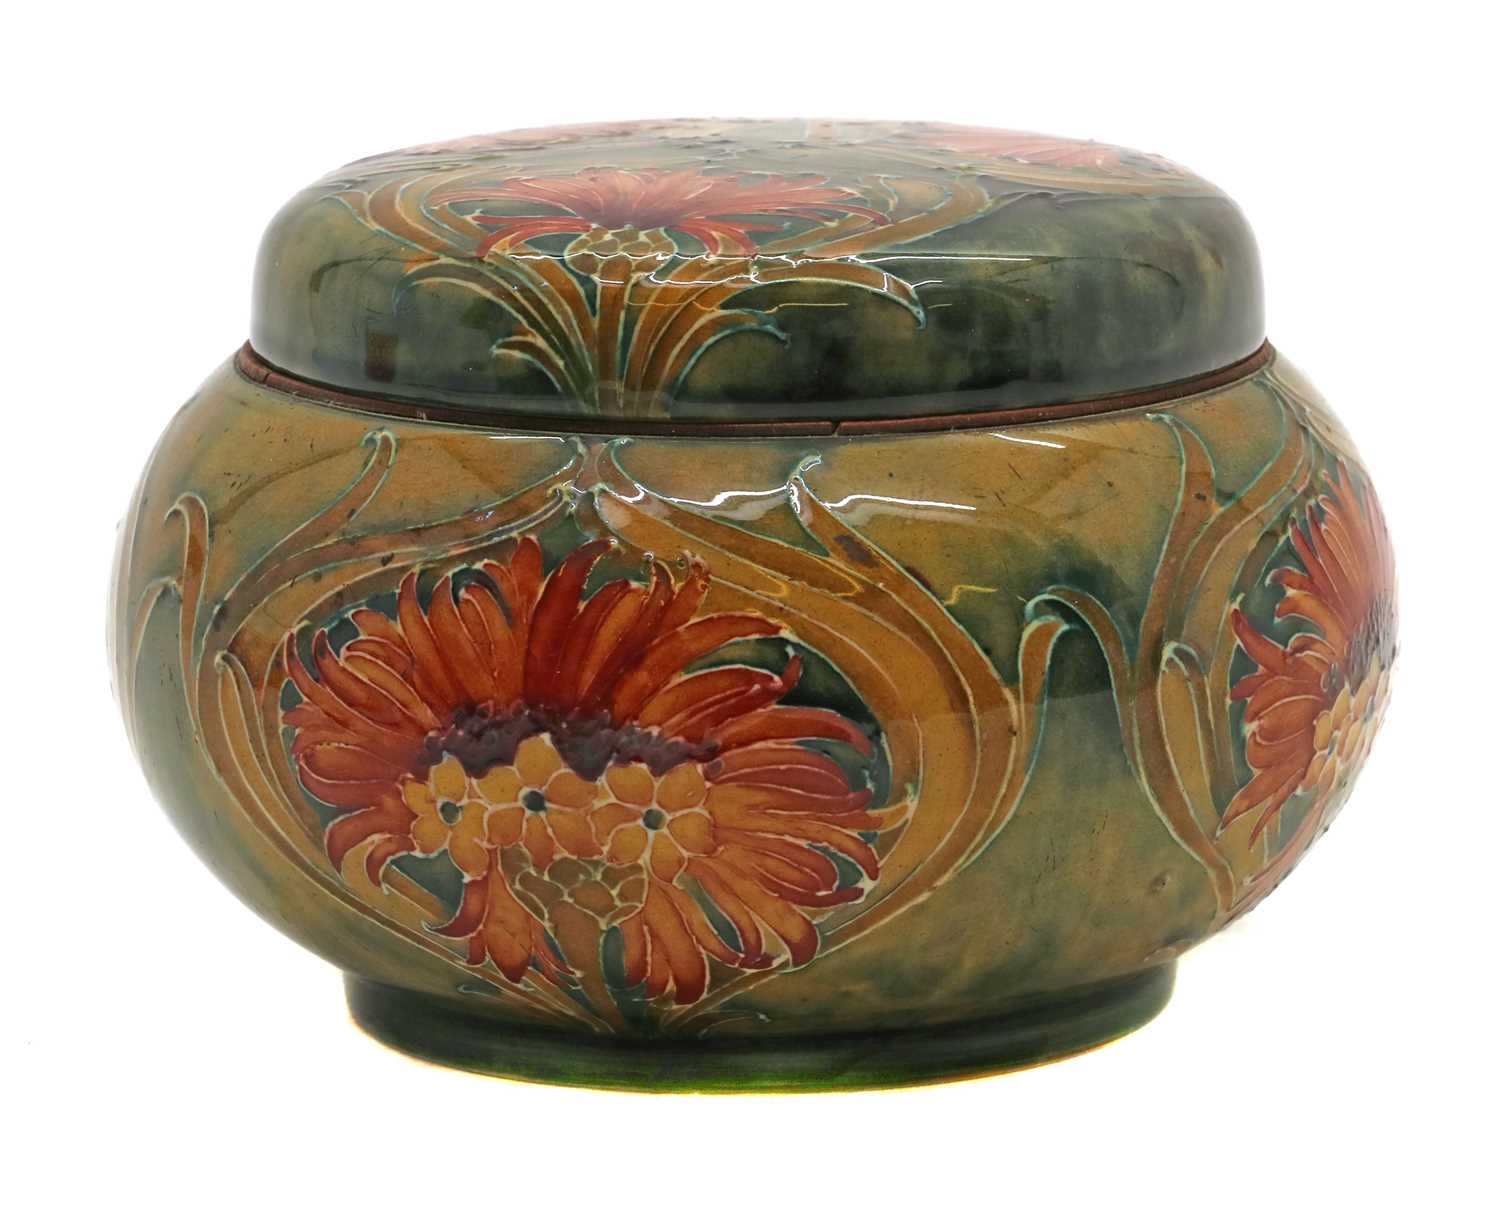 A James Macintyre & Co tobacco jar and cover